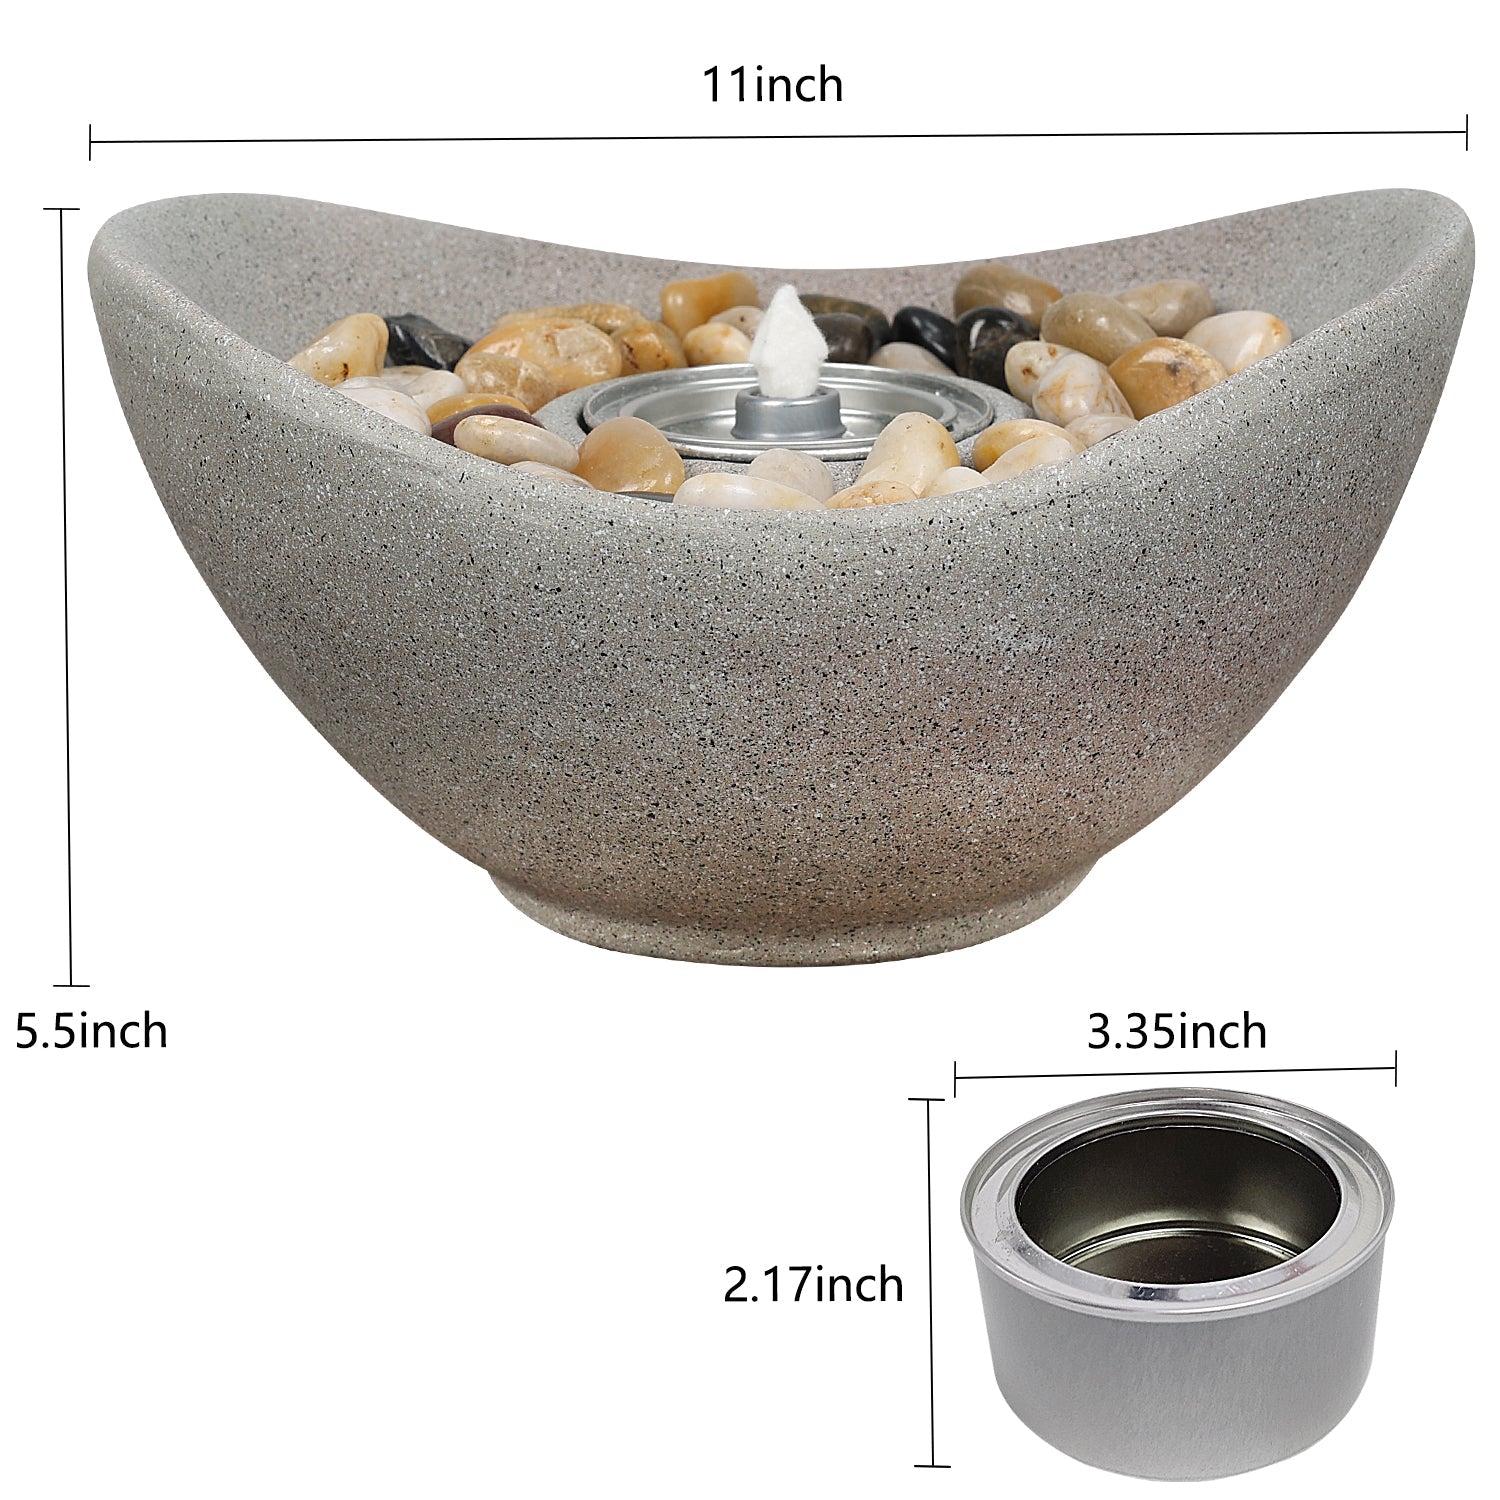 Portable Concrete Fire Pit - Indoor/Outdoor Tabletop Fireplace for Balcony, Patio Decor - Aoodor